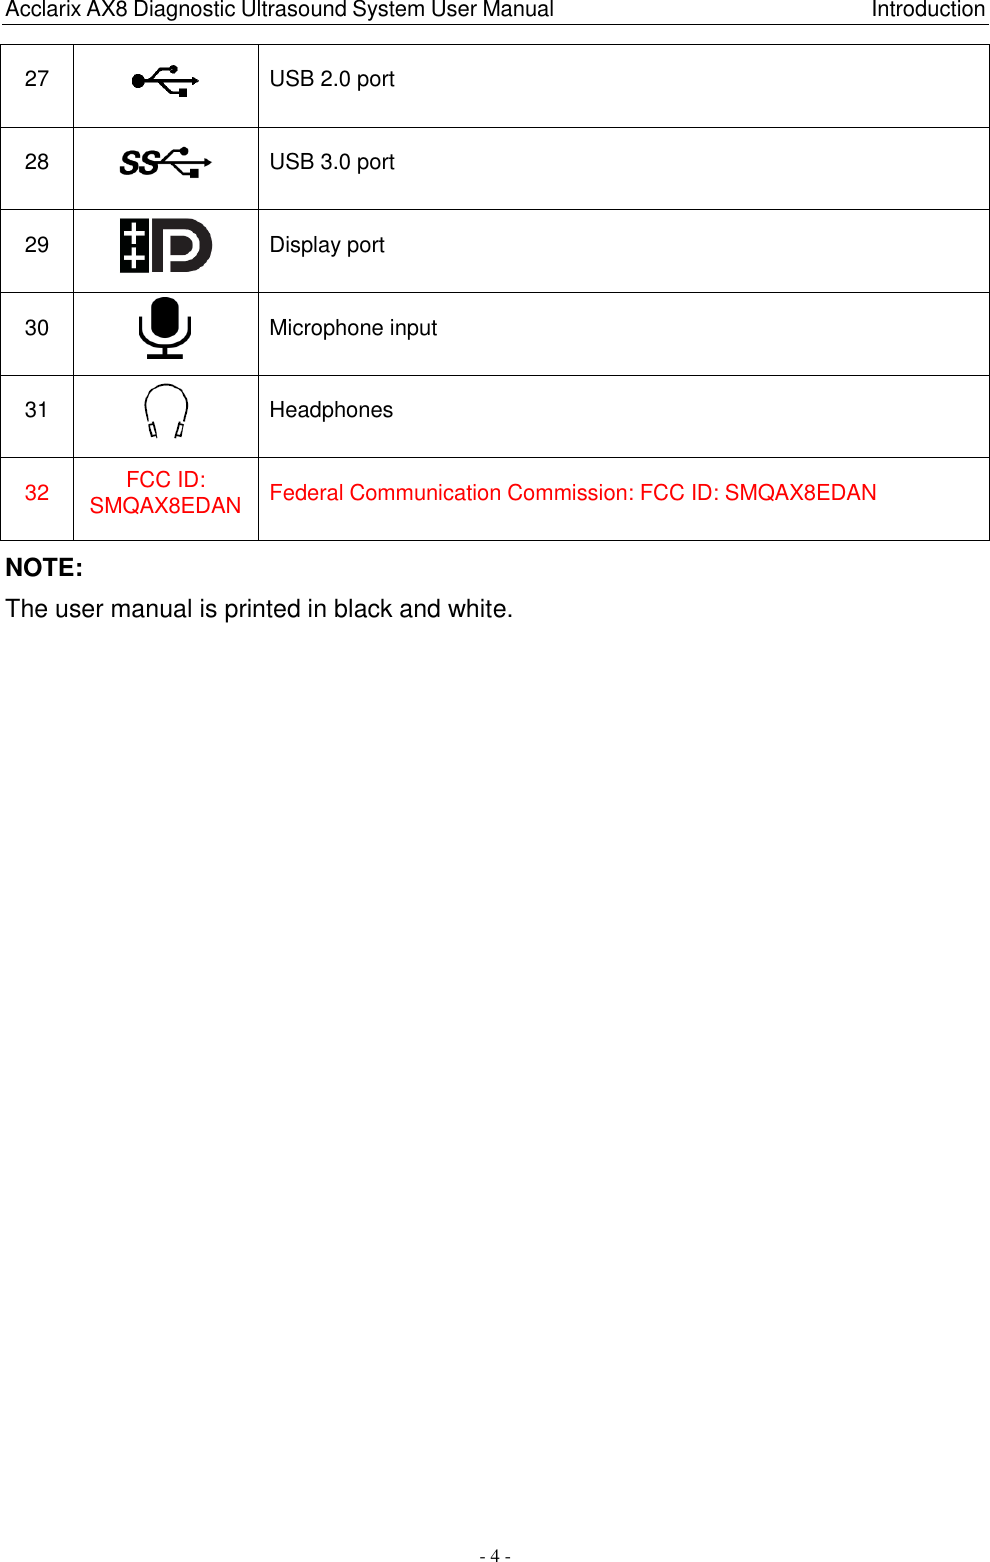 Acclarix AX8 Diagnostic Ultrasound System User Manual                                                          Introduction - 4 - 27  USB 2.0 port   28  USB 3.0 port   29  Display port 30  Microphone input   31  Headphones   32 FCC ID: SMQAX8EDAN Federal Communication Commission: FCC ID: SMQAX8EDAN NOTE:   The user manual is printed in black and white. 